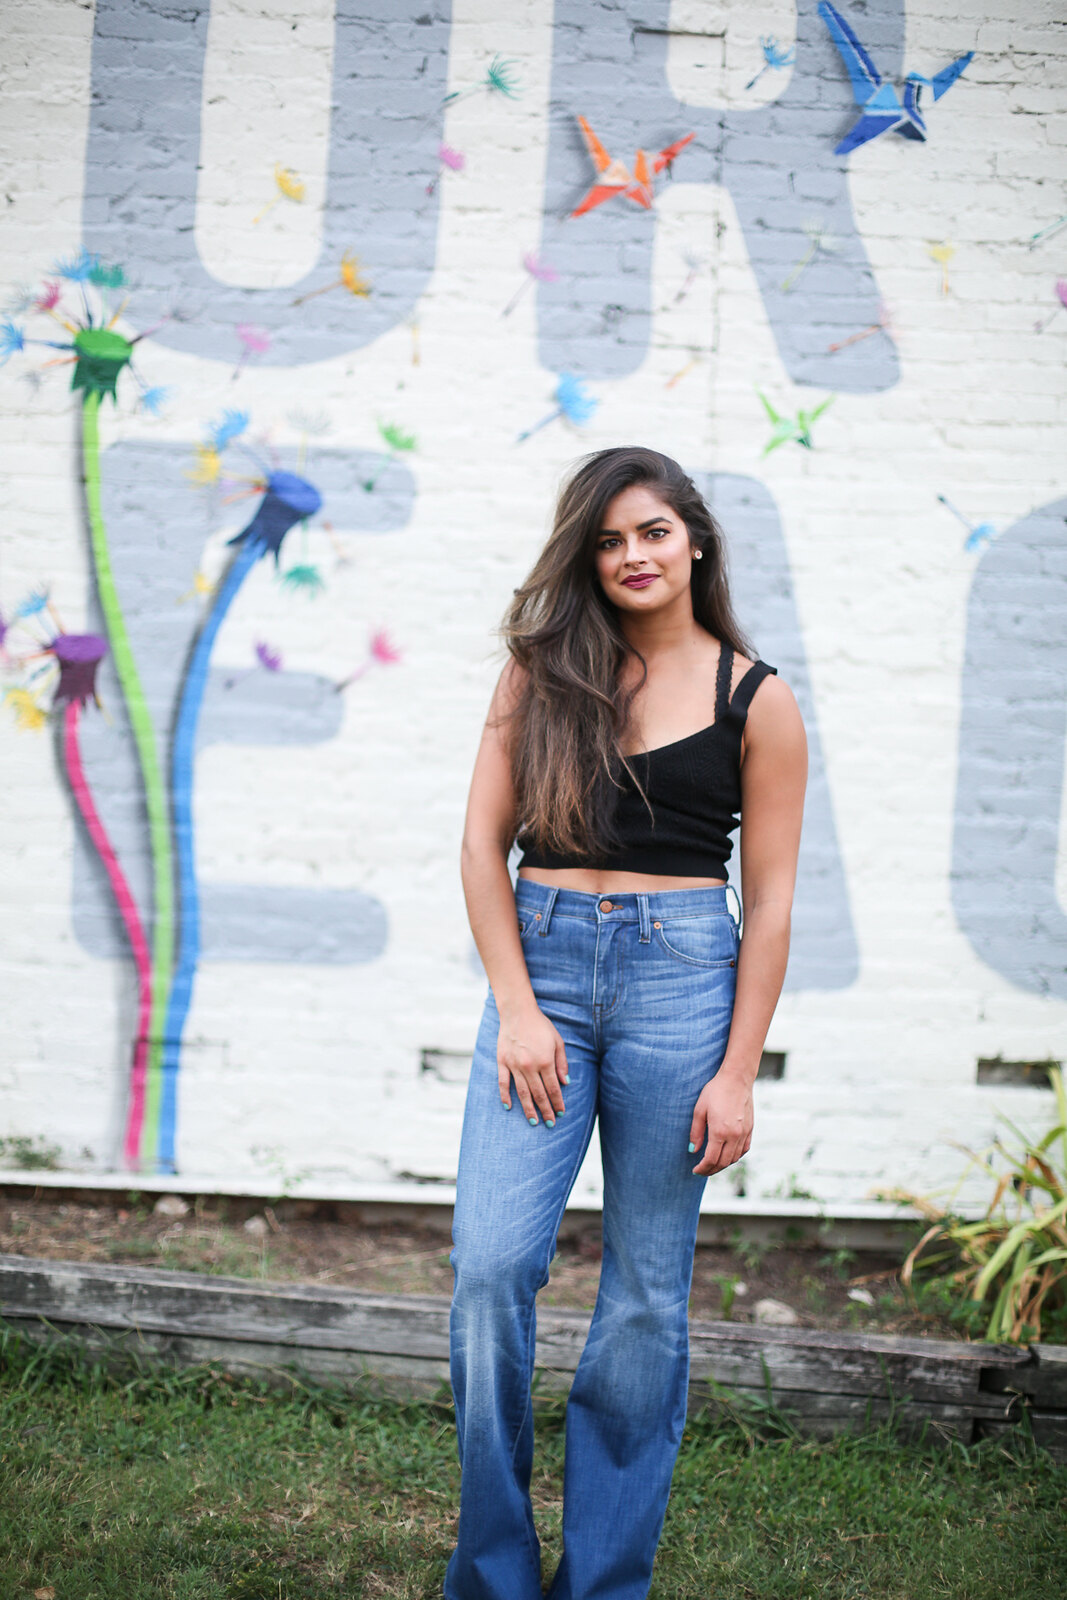 Priya the Blog, Nashville fashion blog, Nashville fashion blogger, Nashville style blog, Nashville style blogger, Nashville mural, Nashville Wish for Peace mural, Summer outfit, Madewell Flea Market Flares, flared jeans, how to wear flared jeans, knit crop top, Zara knit crop top, how to wear a knit crop top, 